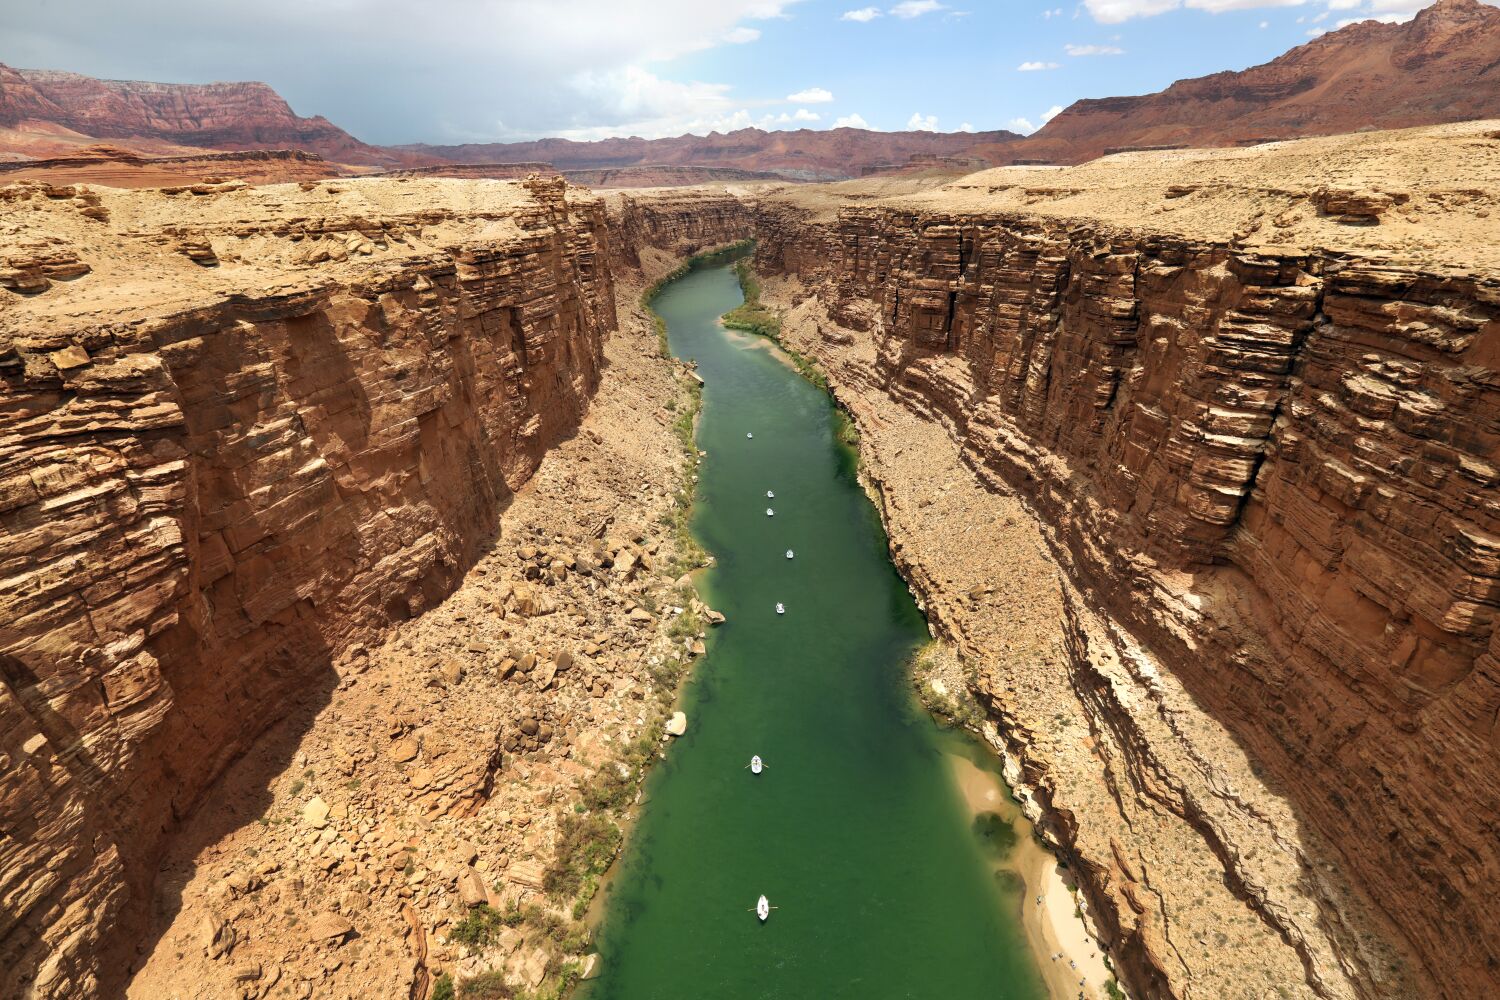 Opinion: California and its neighbors are at an impasse over the Colorado River. Here's a way forward